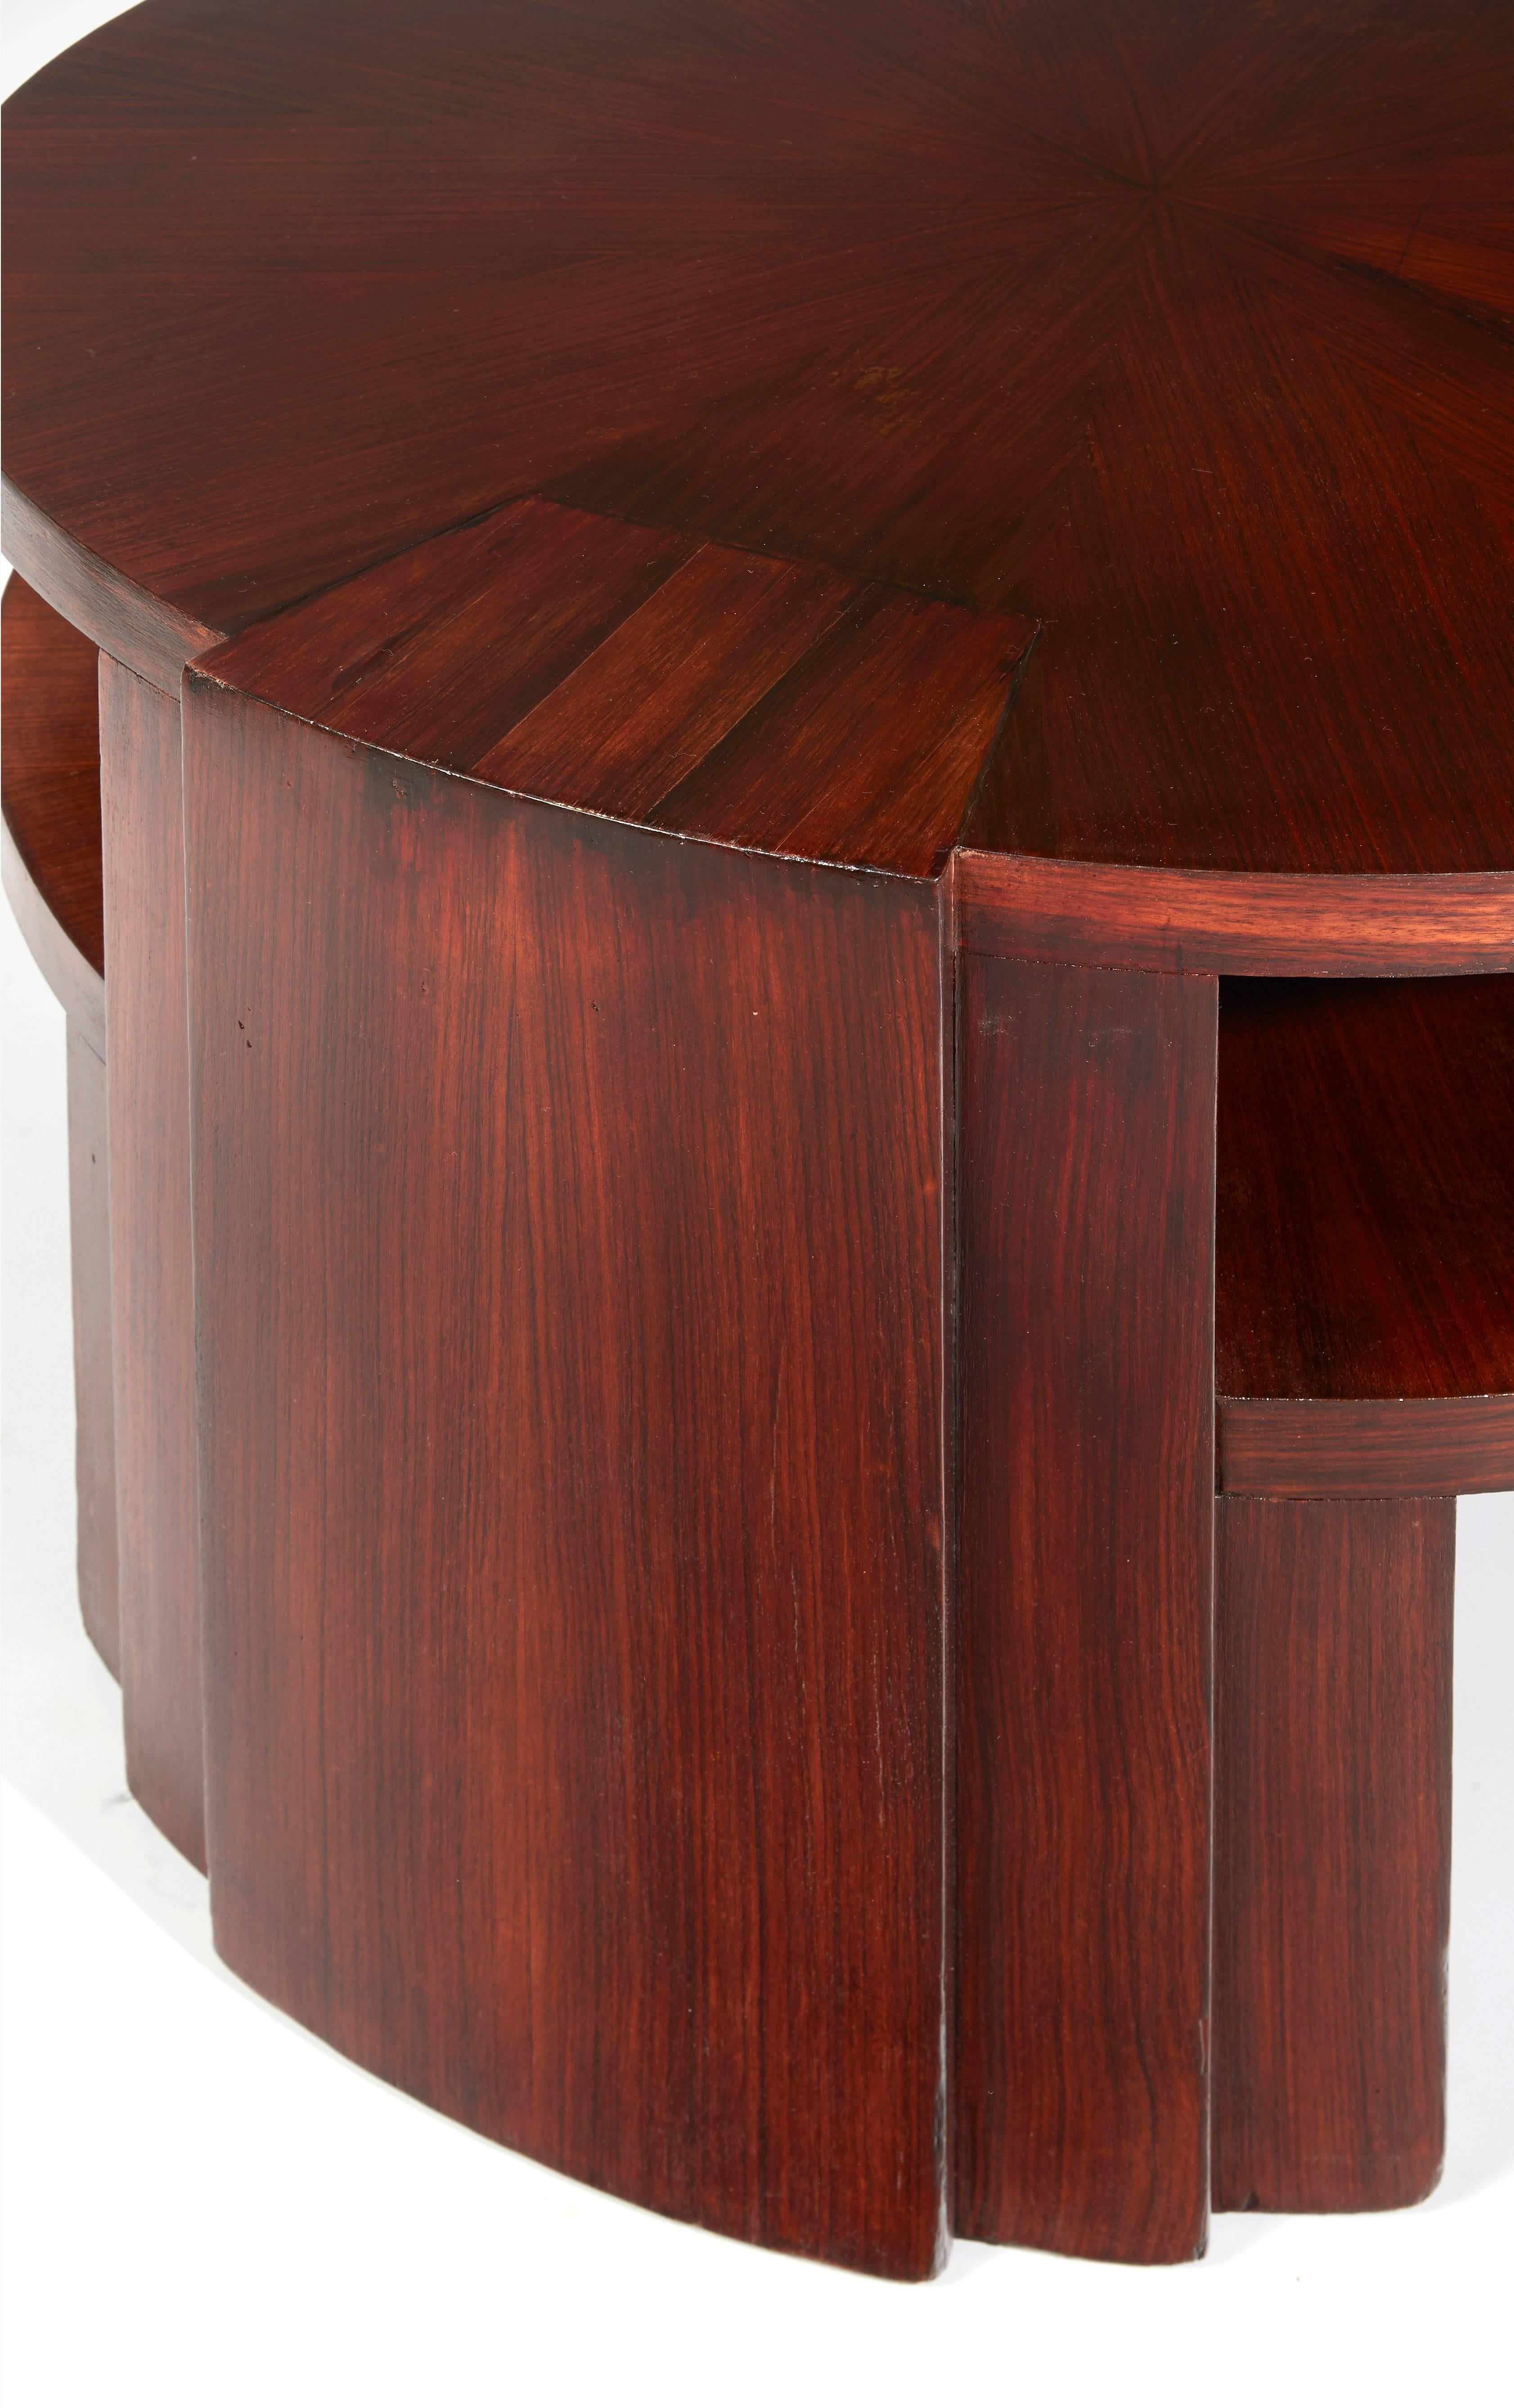 French pedestal circular table made in rosewood, designed by Maison Dominique, circa 1930.
Measures: 22 x 39 in.